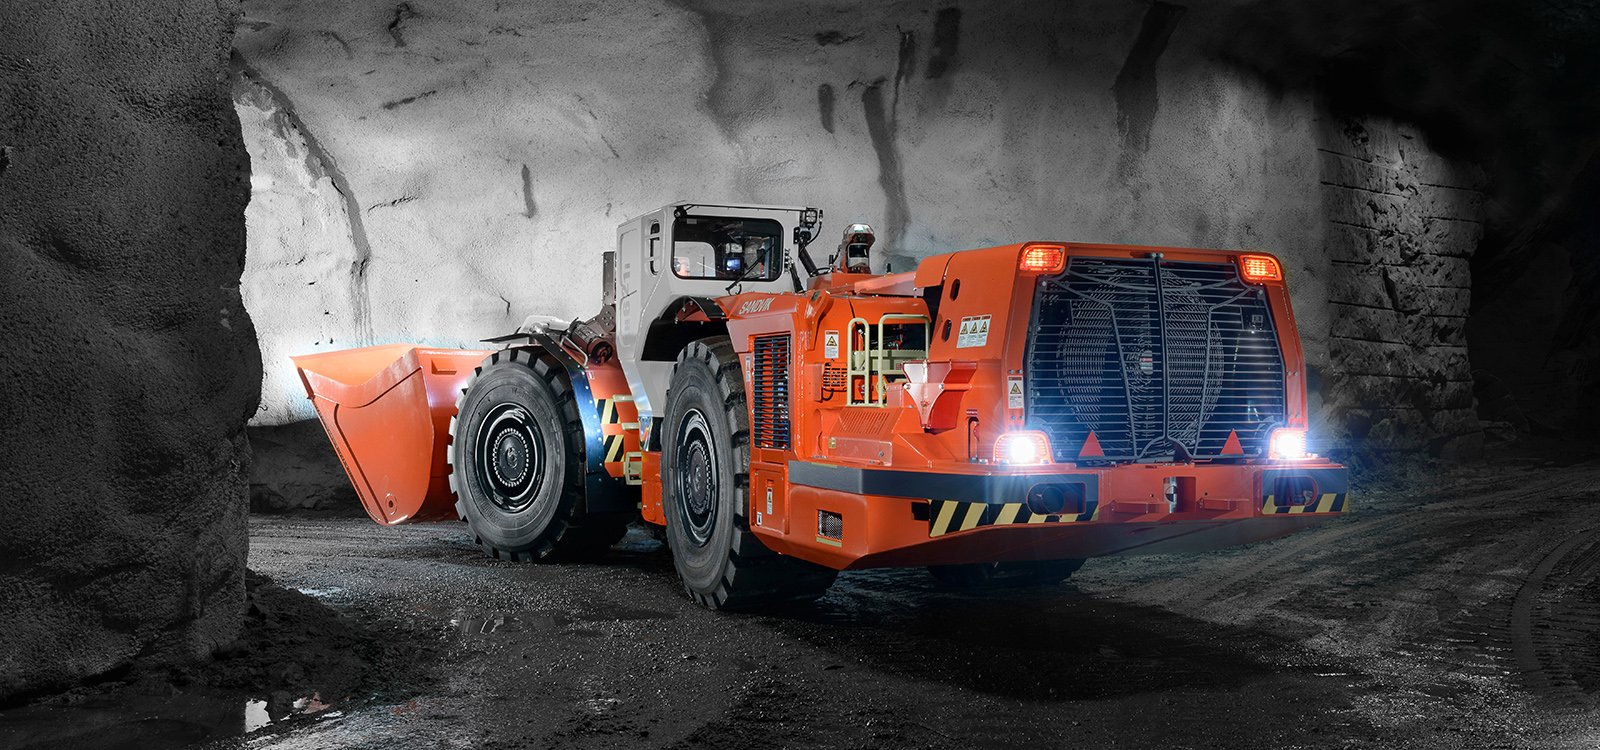 <p>The new Sandvik LH621i loader impressed Byrnecut Australia with its performance on grade, cabin enhancements, hydraulic functionality and braking.</p>
